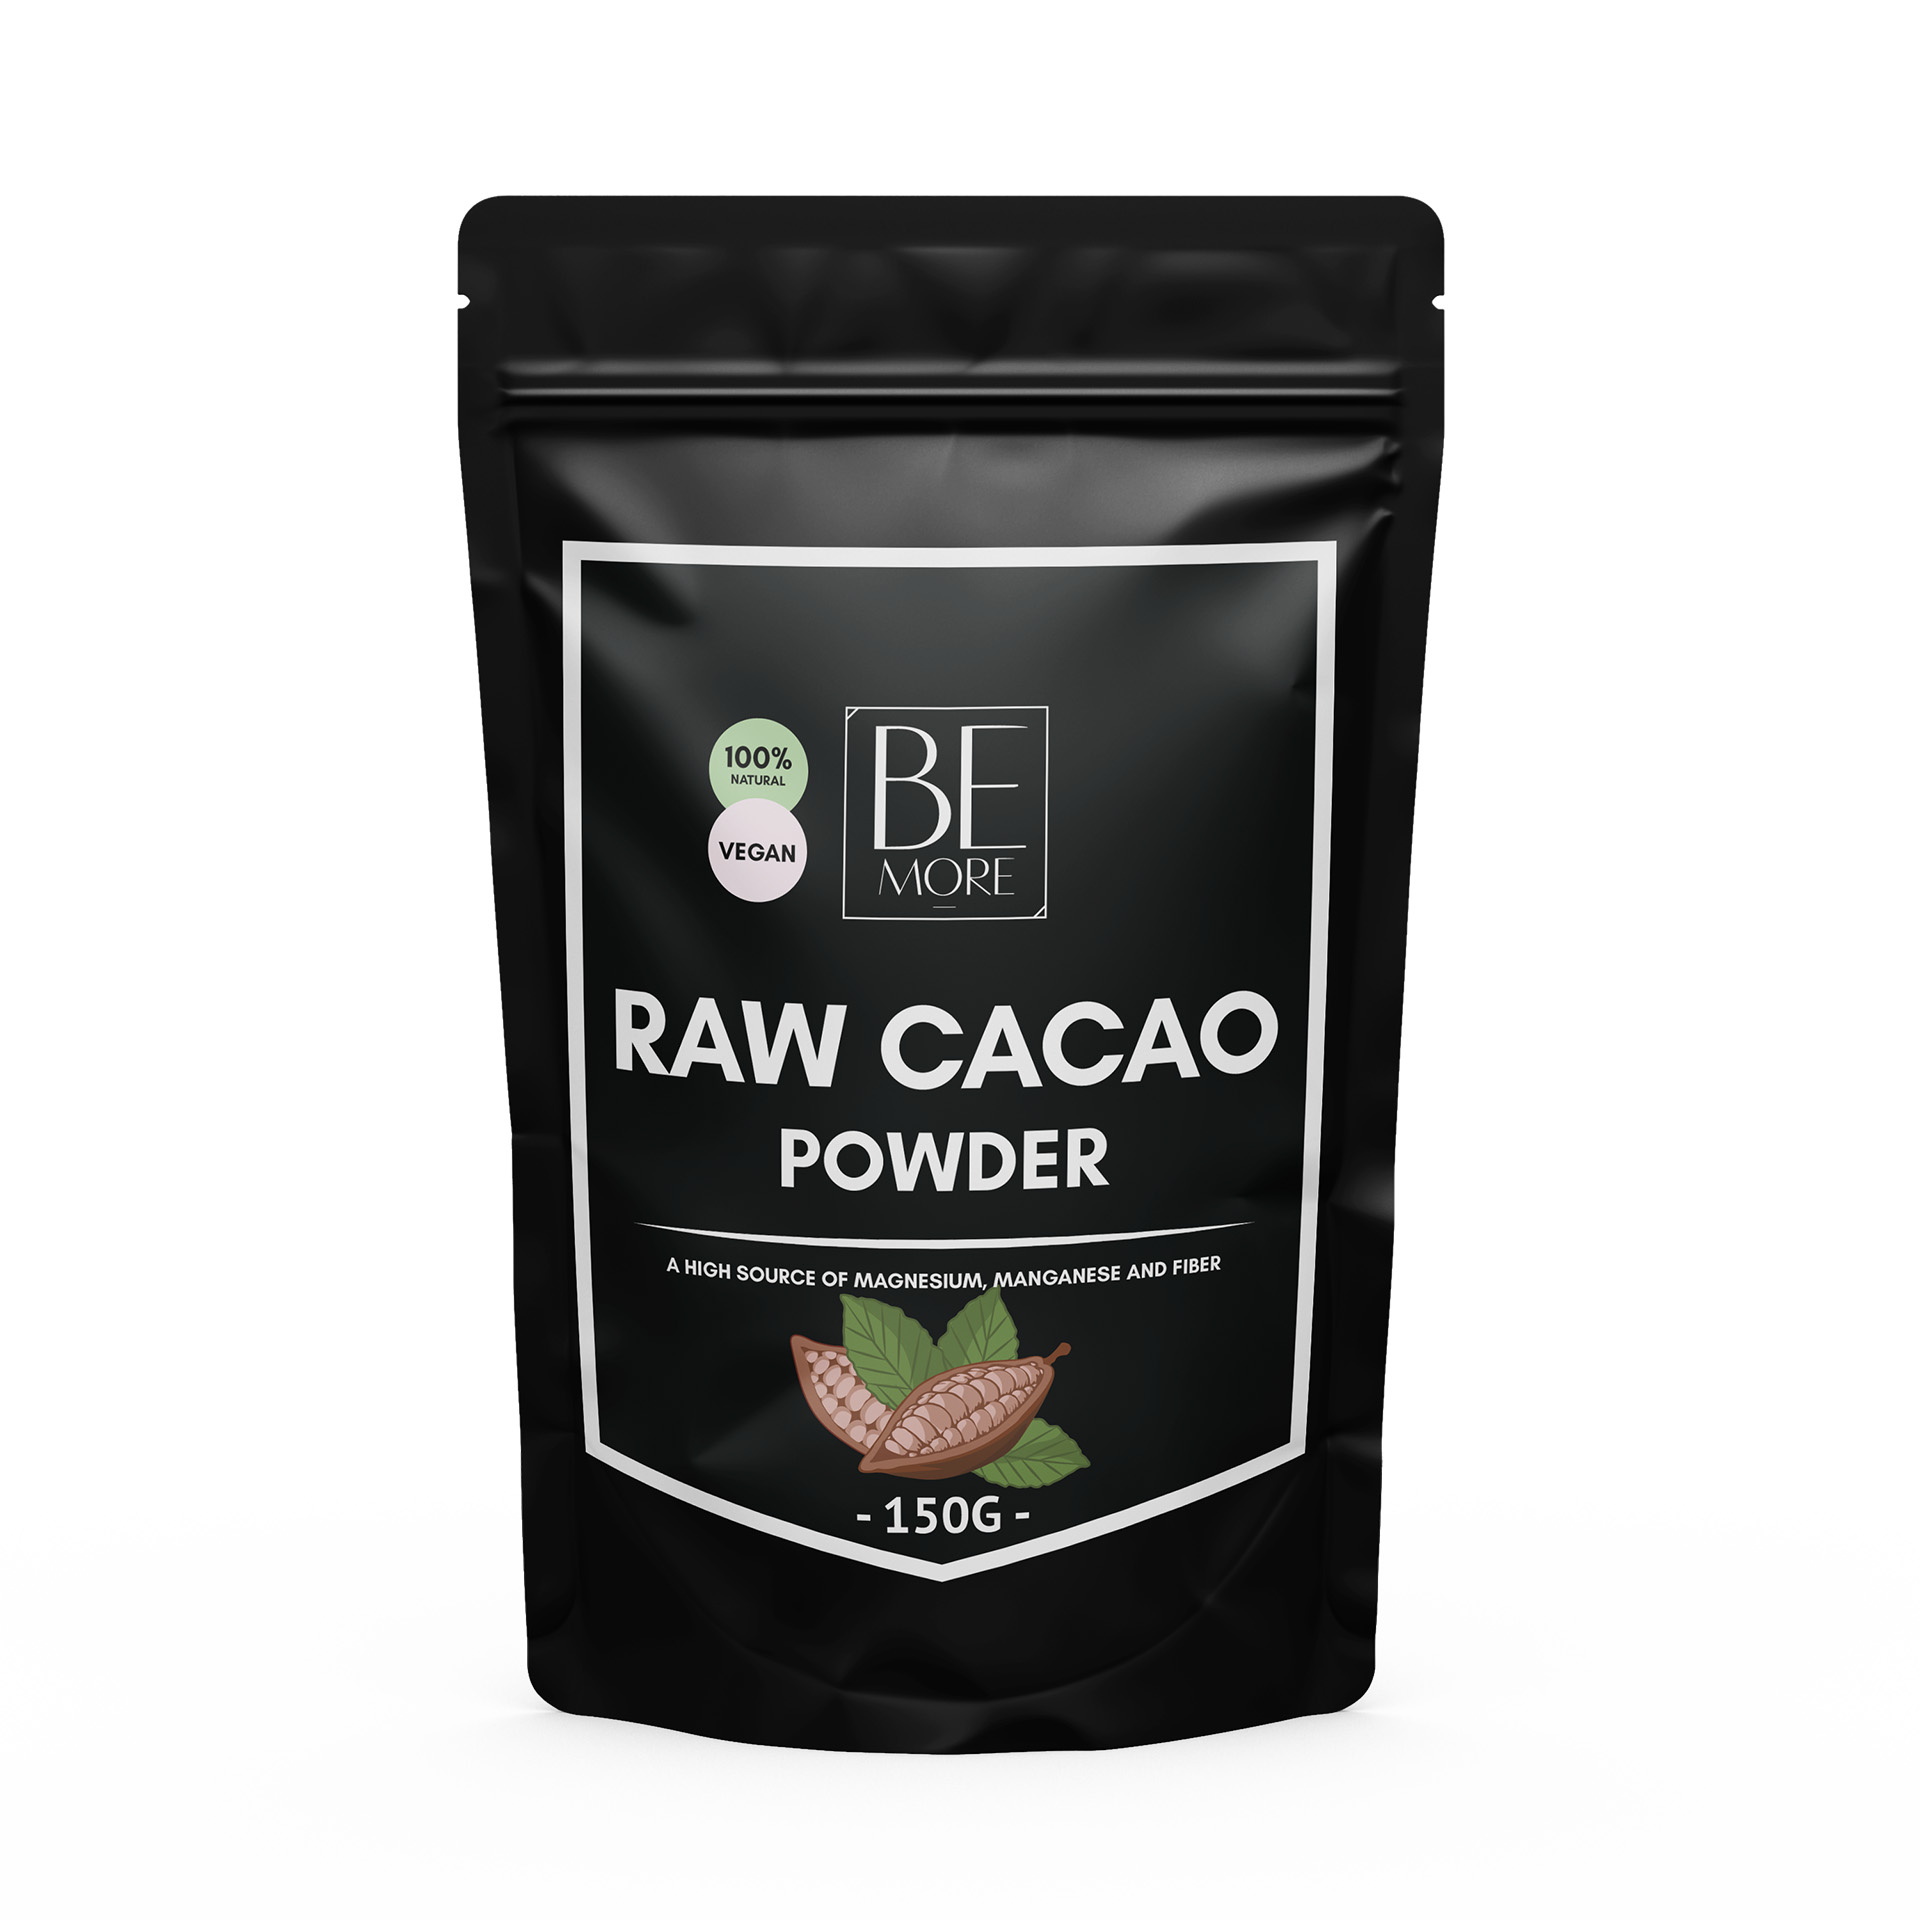 Raw cacao powder, 150gr - Be More